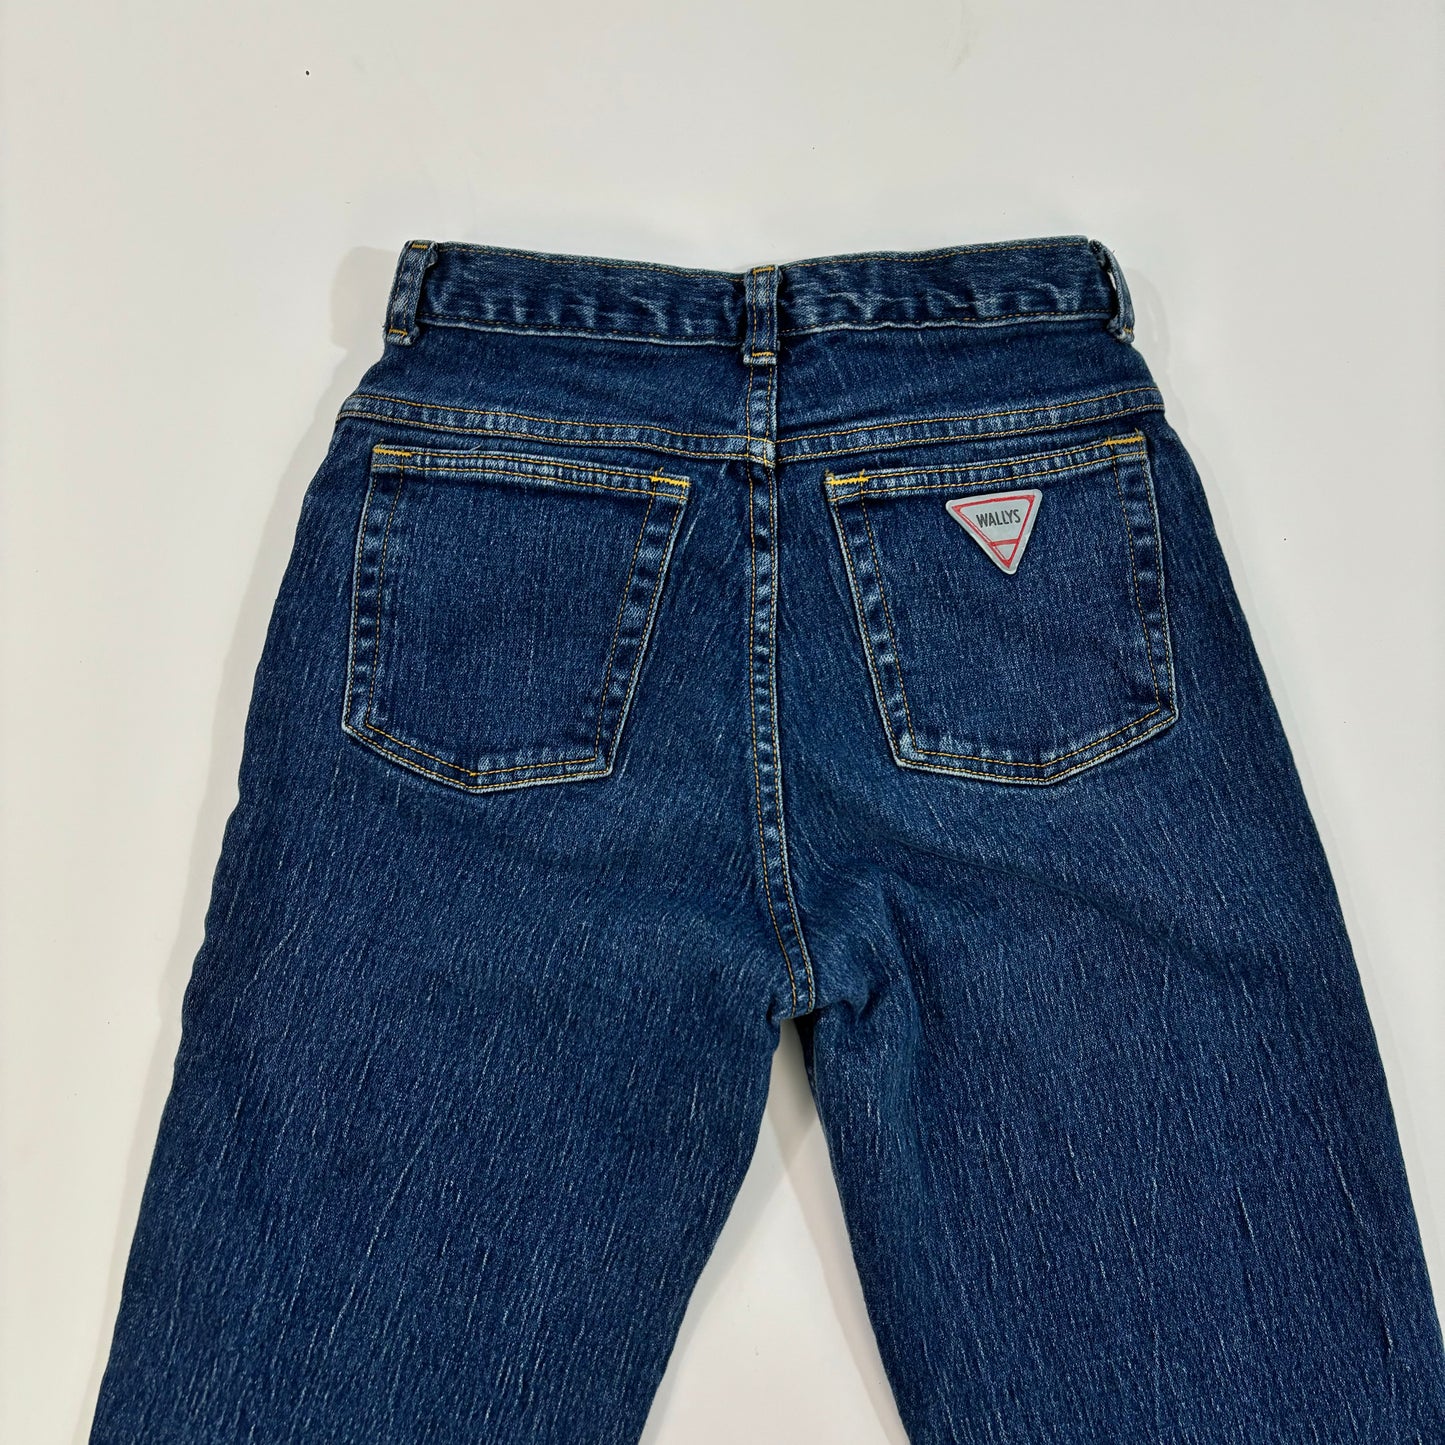 Vintage Wally High Waisted Jeans - 25